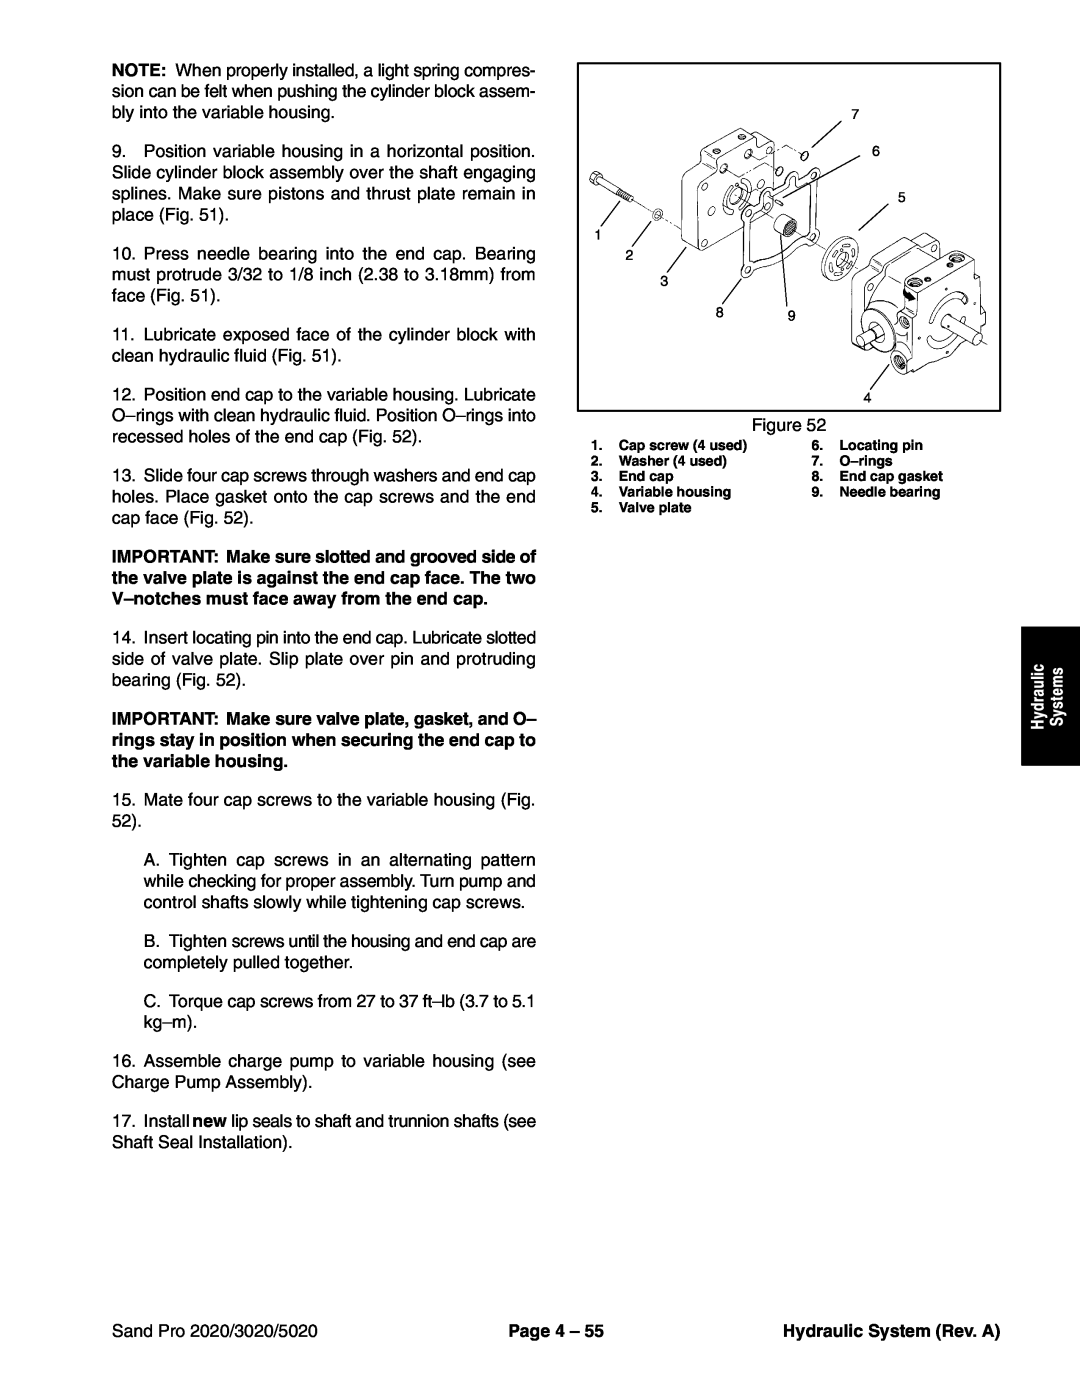 Toro service manual Systems, Sand Pro 2020/3020/5020, Page 4, Hydraulic System Rev. A 